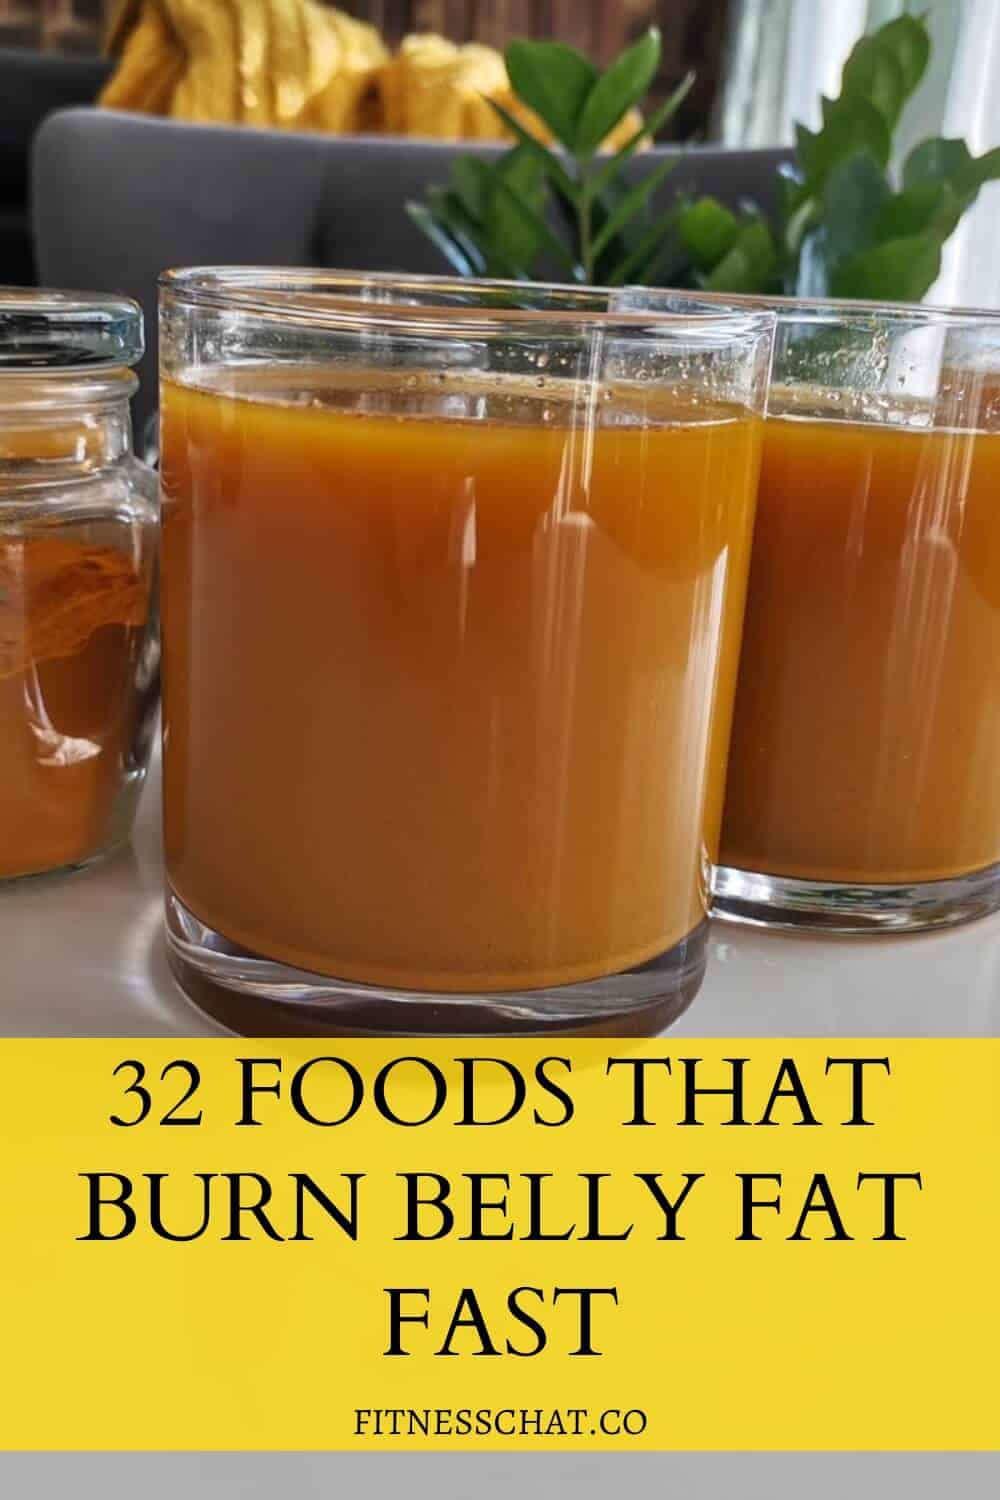 What foods burn belly fat the fastest naturally